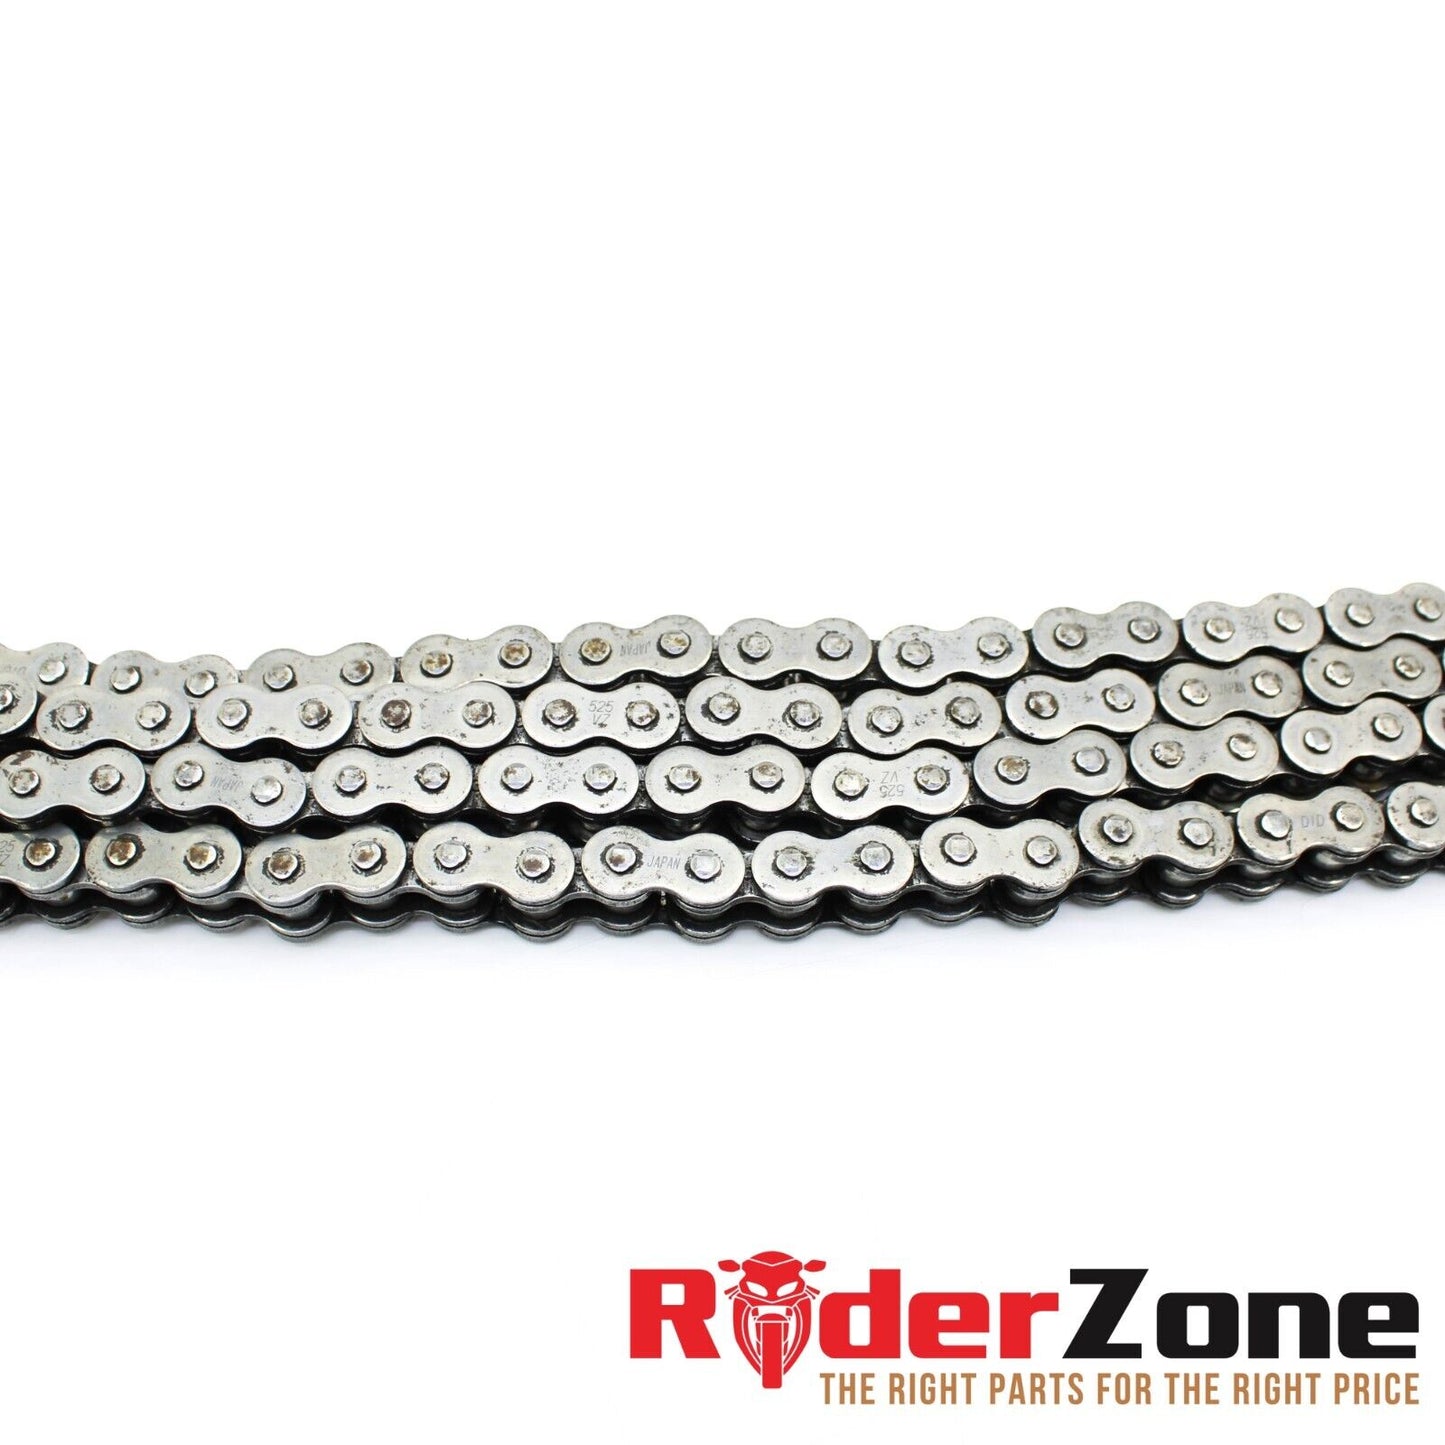 2017 - 2020 DUCATI MONSTER 1200 R S CHAIN DRIVE SILVER GOOD STRAIGHT TESTED